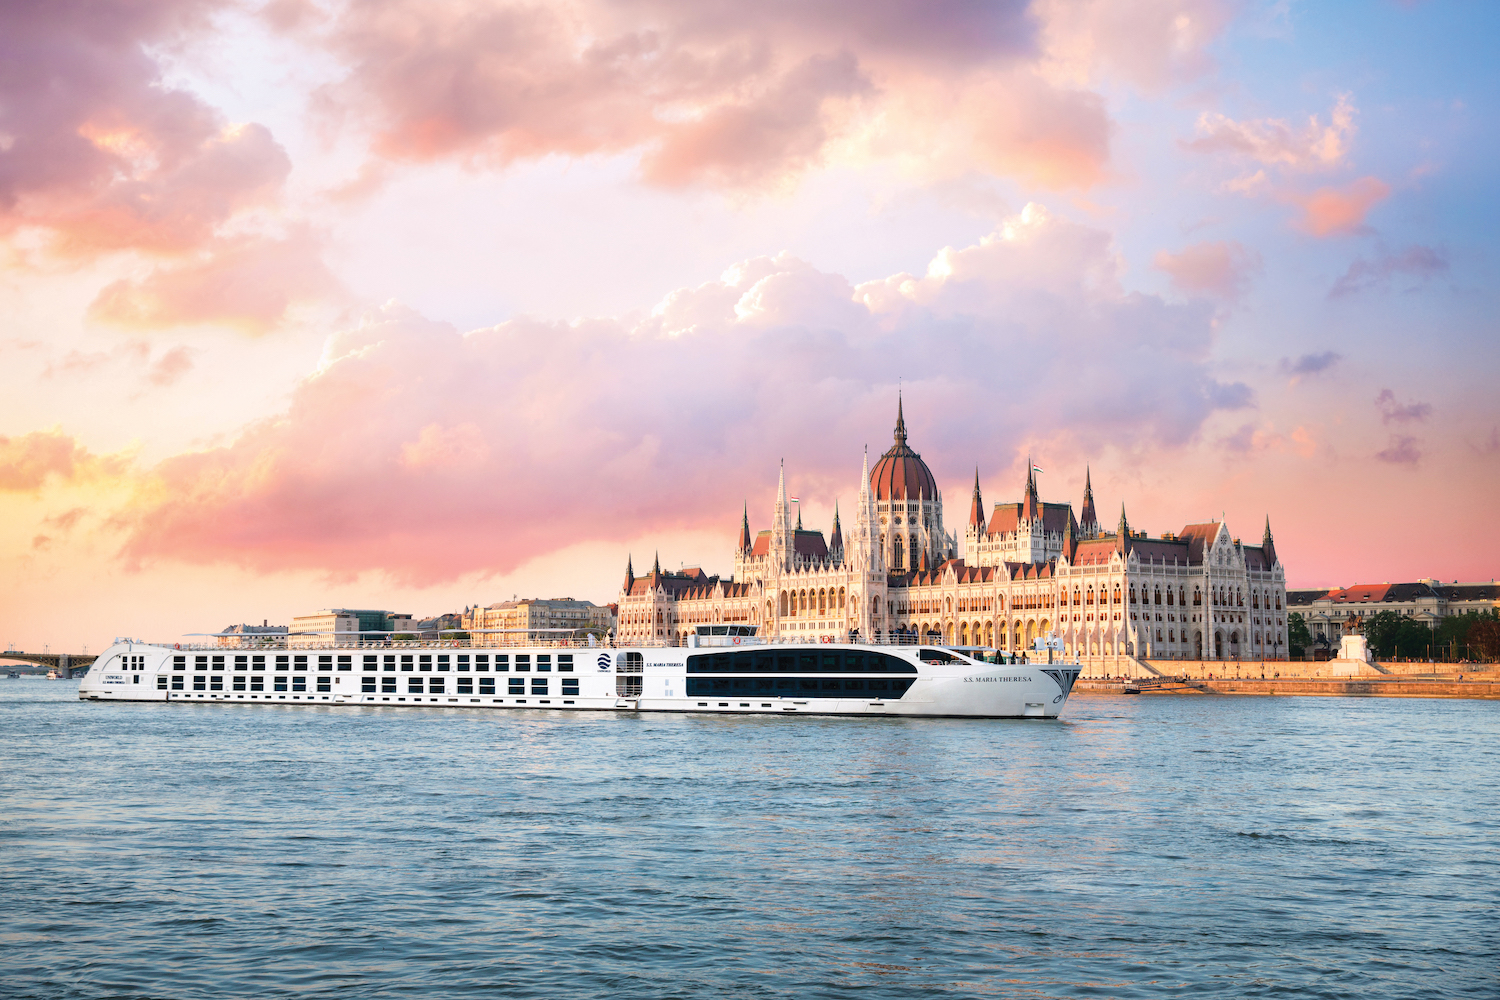 Uniworld SS Maria Theresa in Budapest